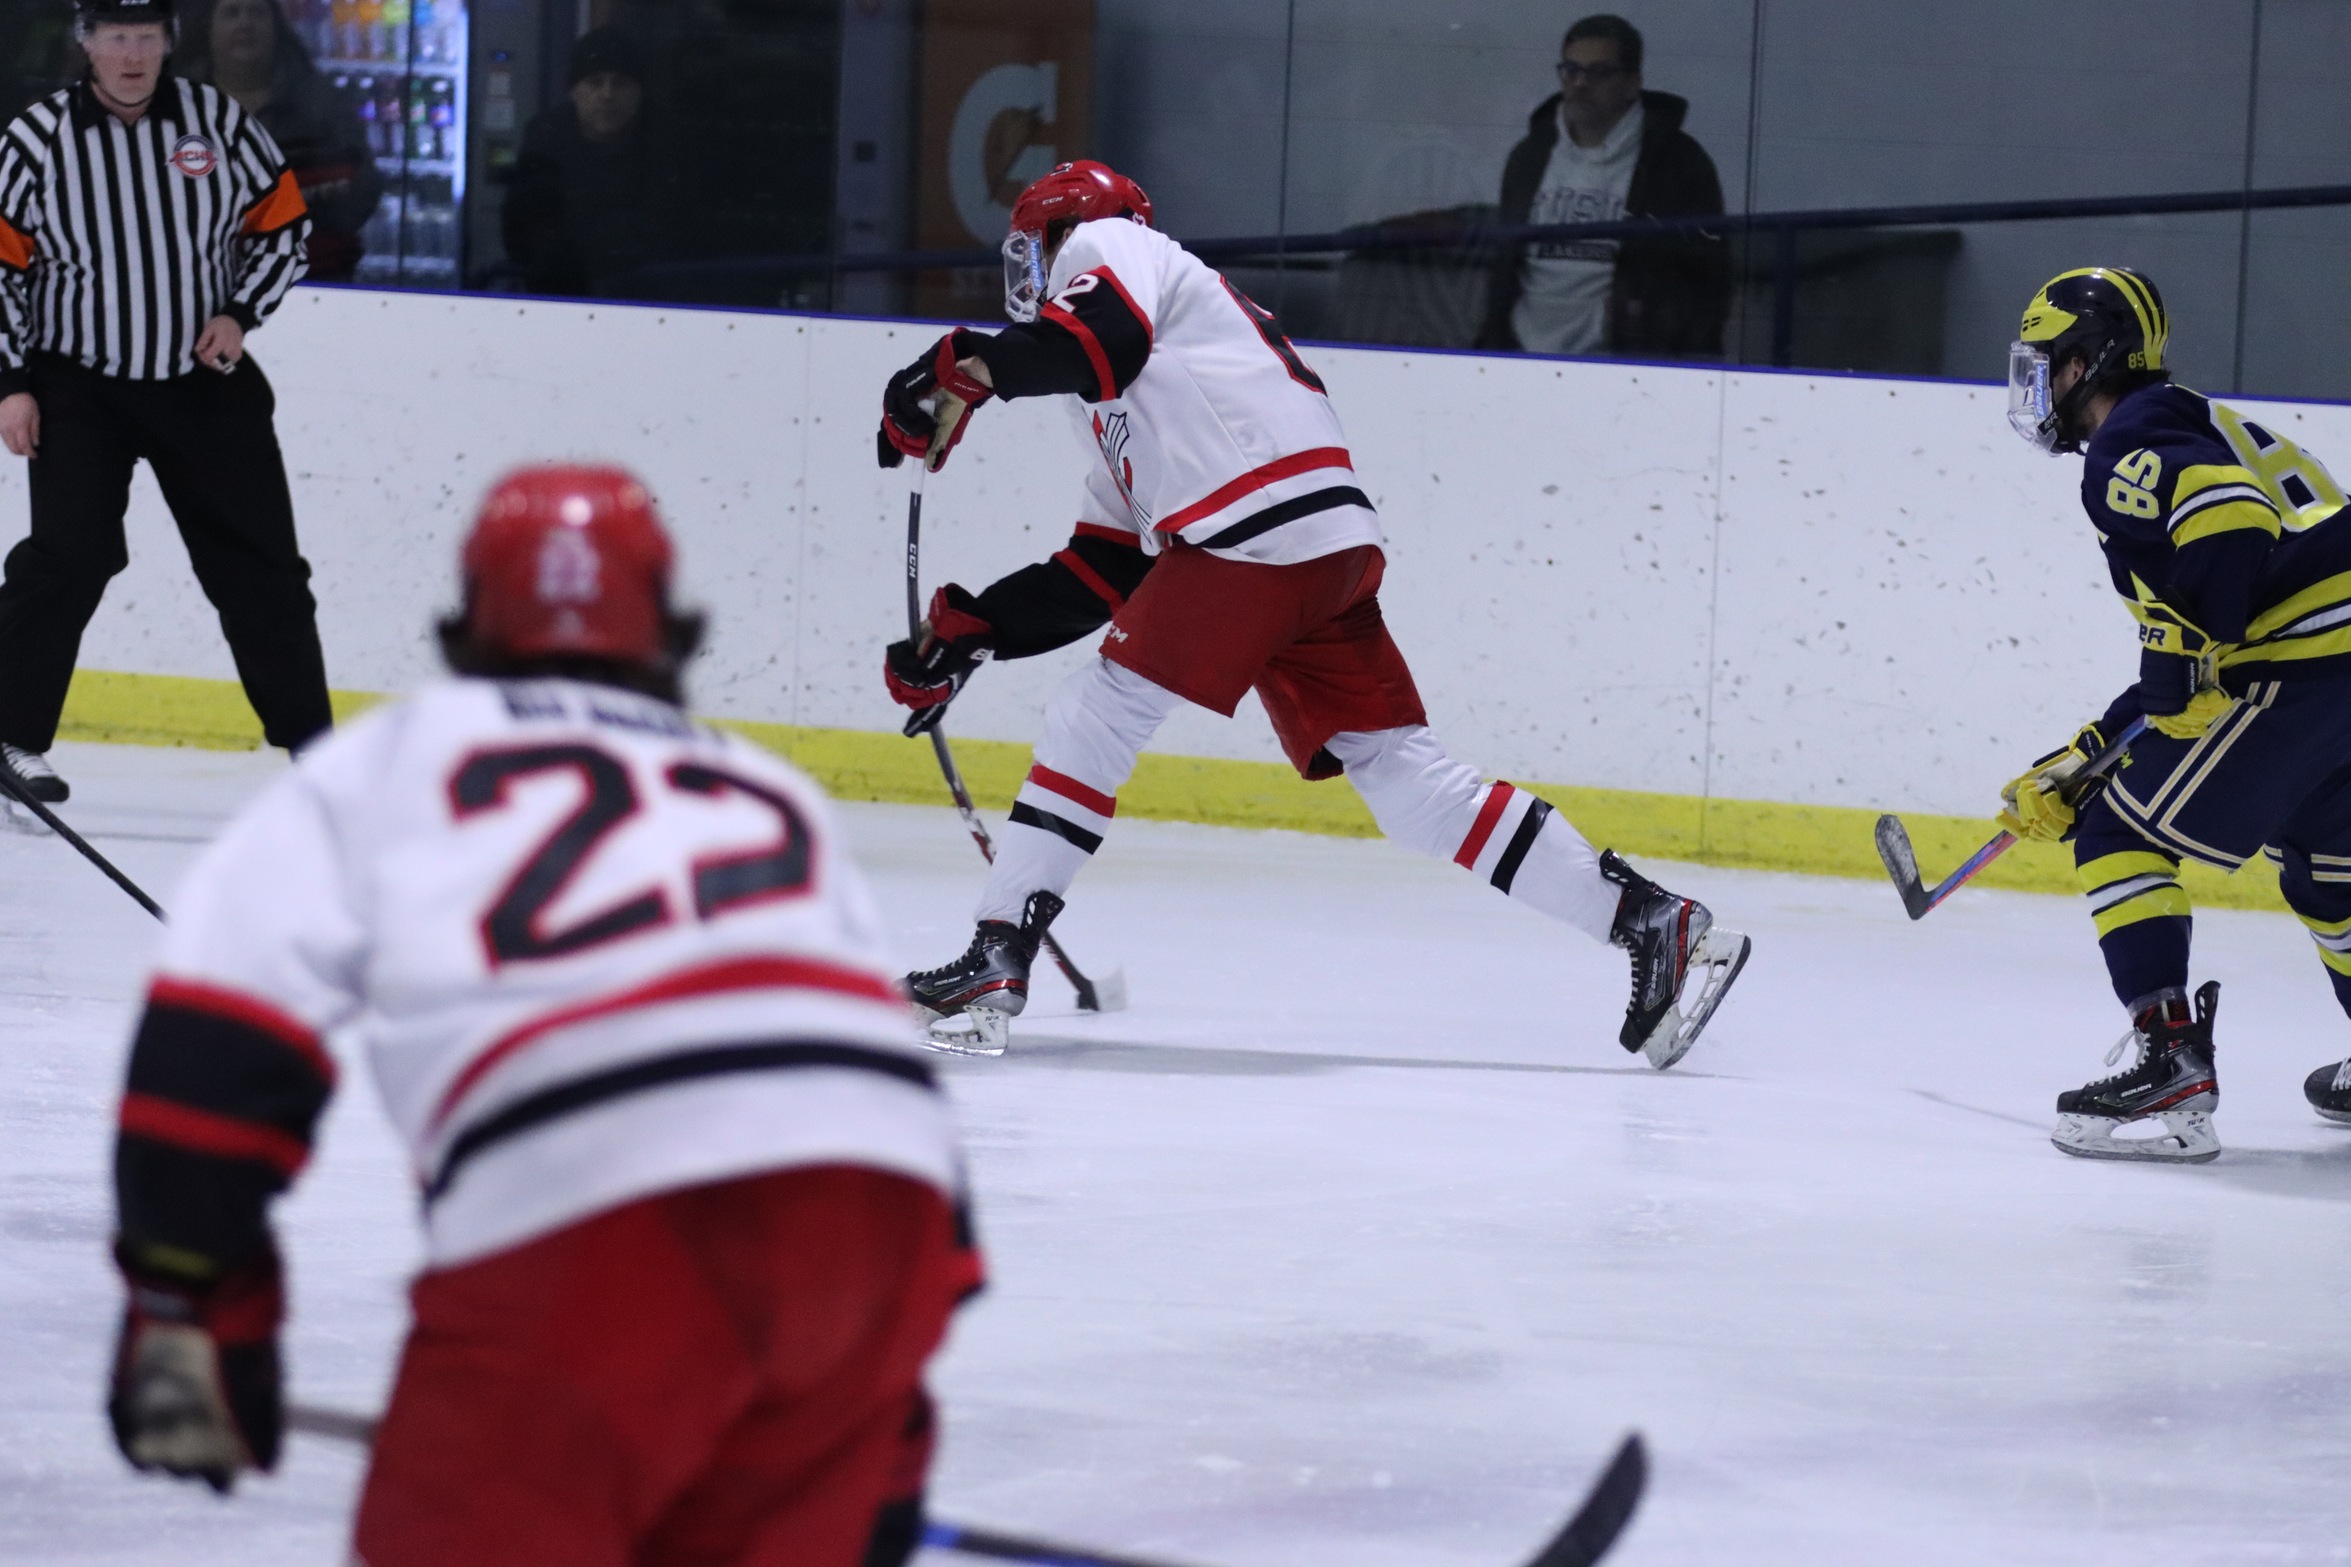 Men's Hockey takes down Aquinas in overtime to move on in WHAC Tournament